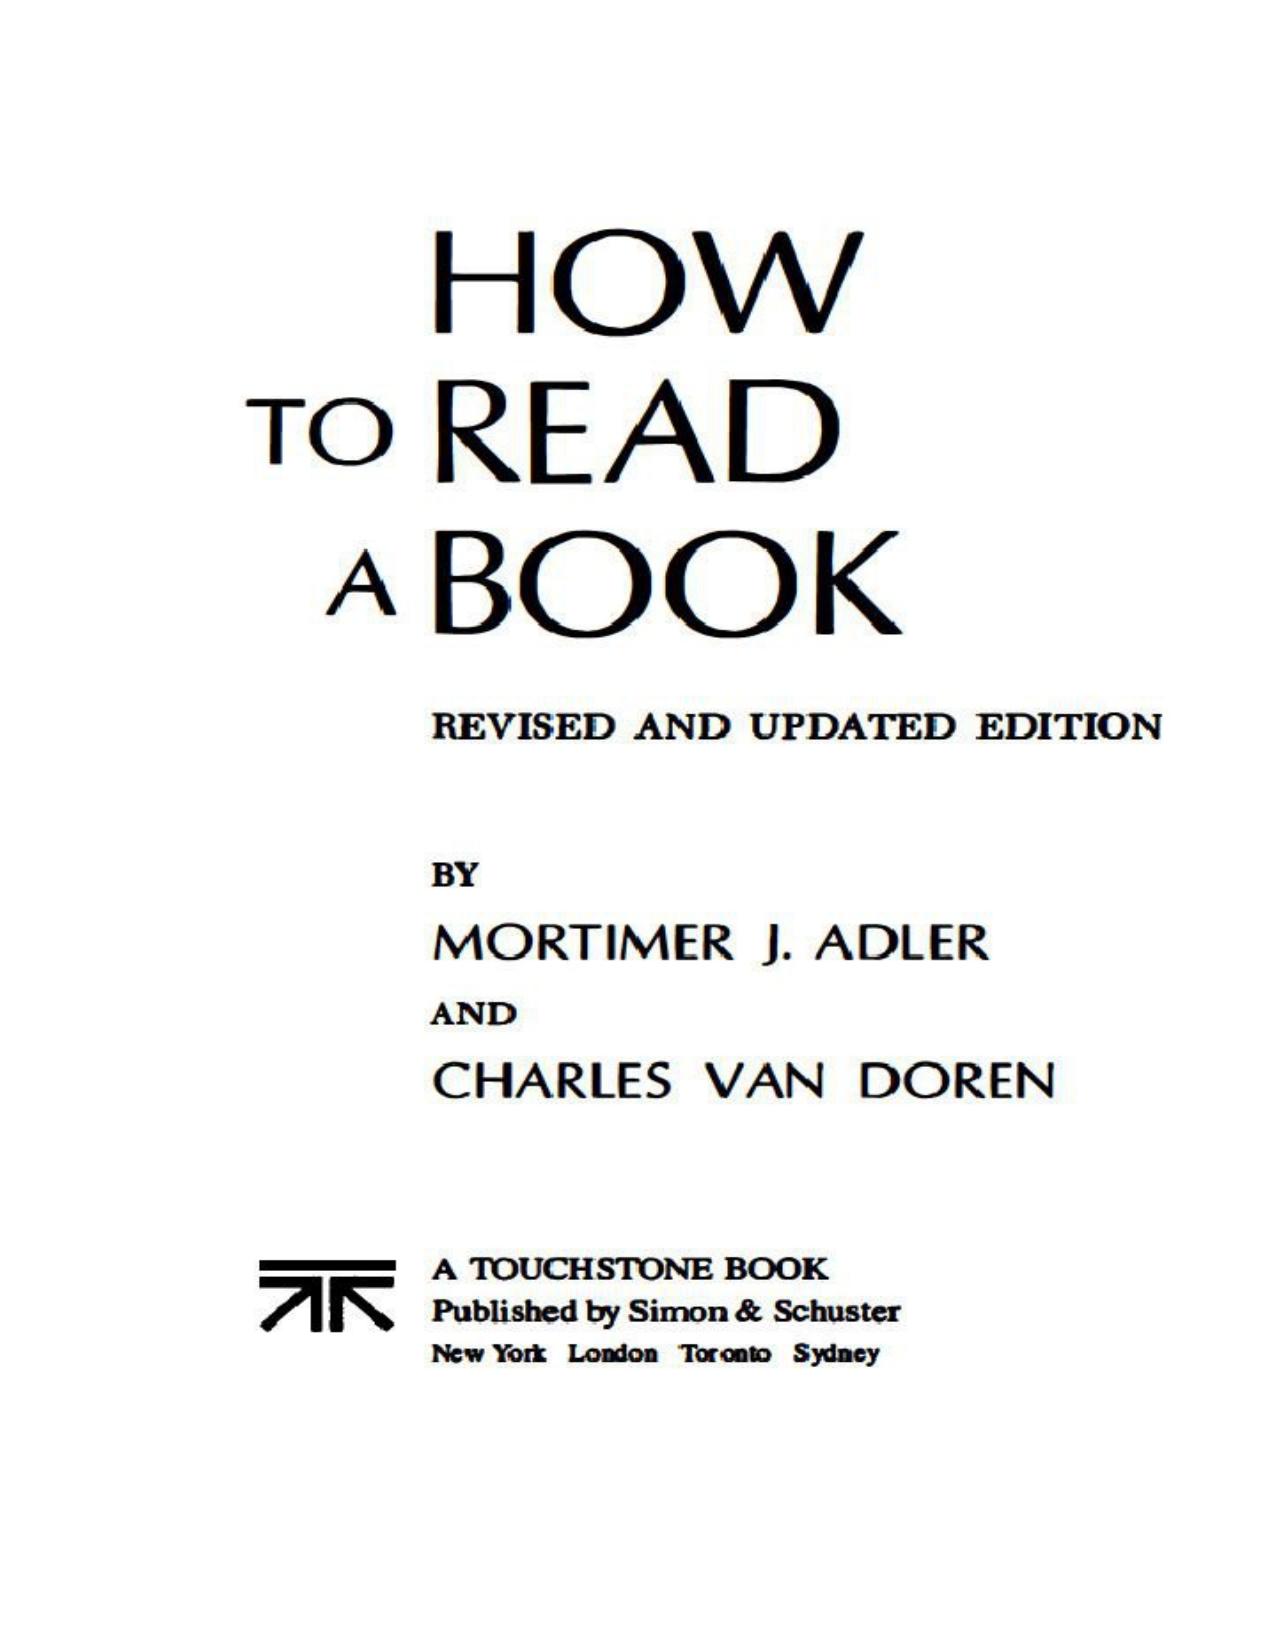 How To Read A Book- A Classic Guide to Intelligent Reading by Charles Van Doren Mortimer J. Adler